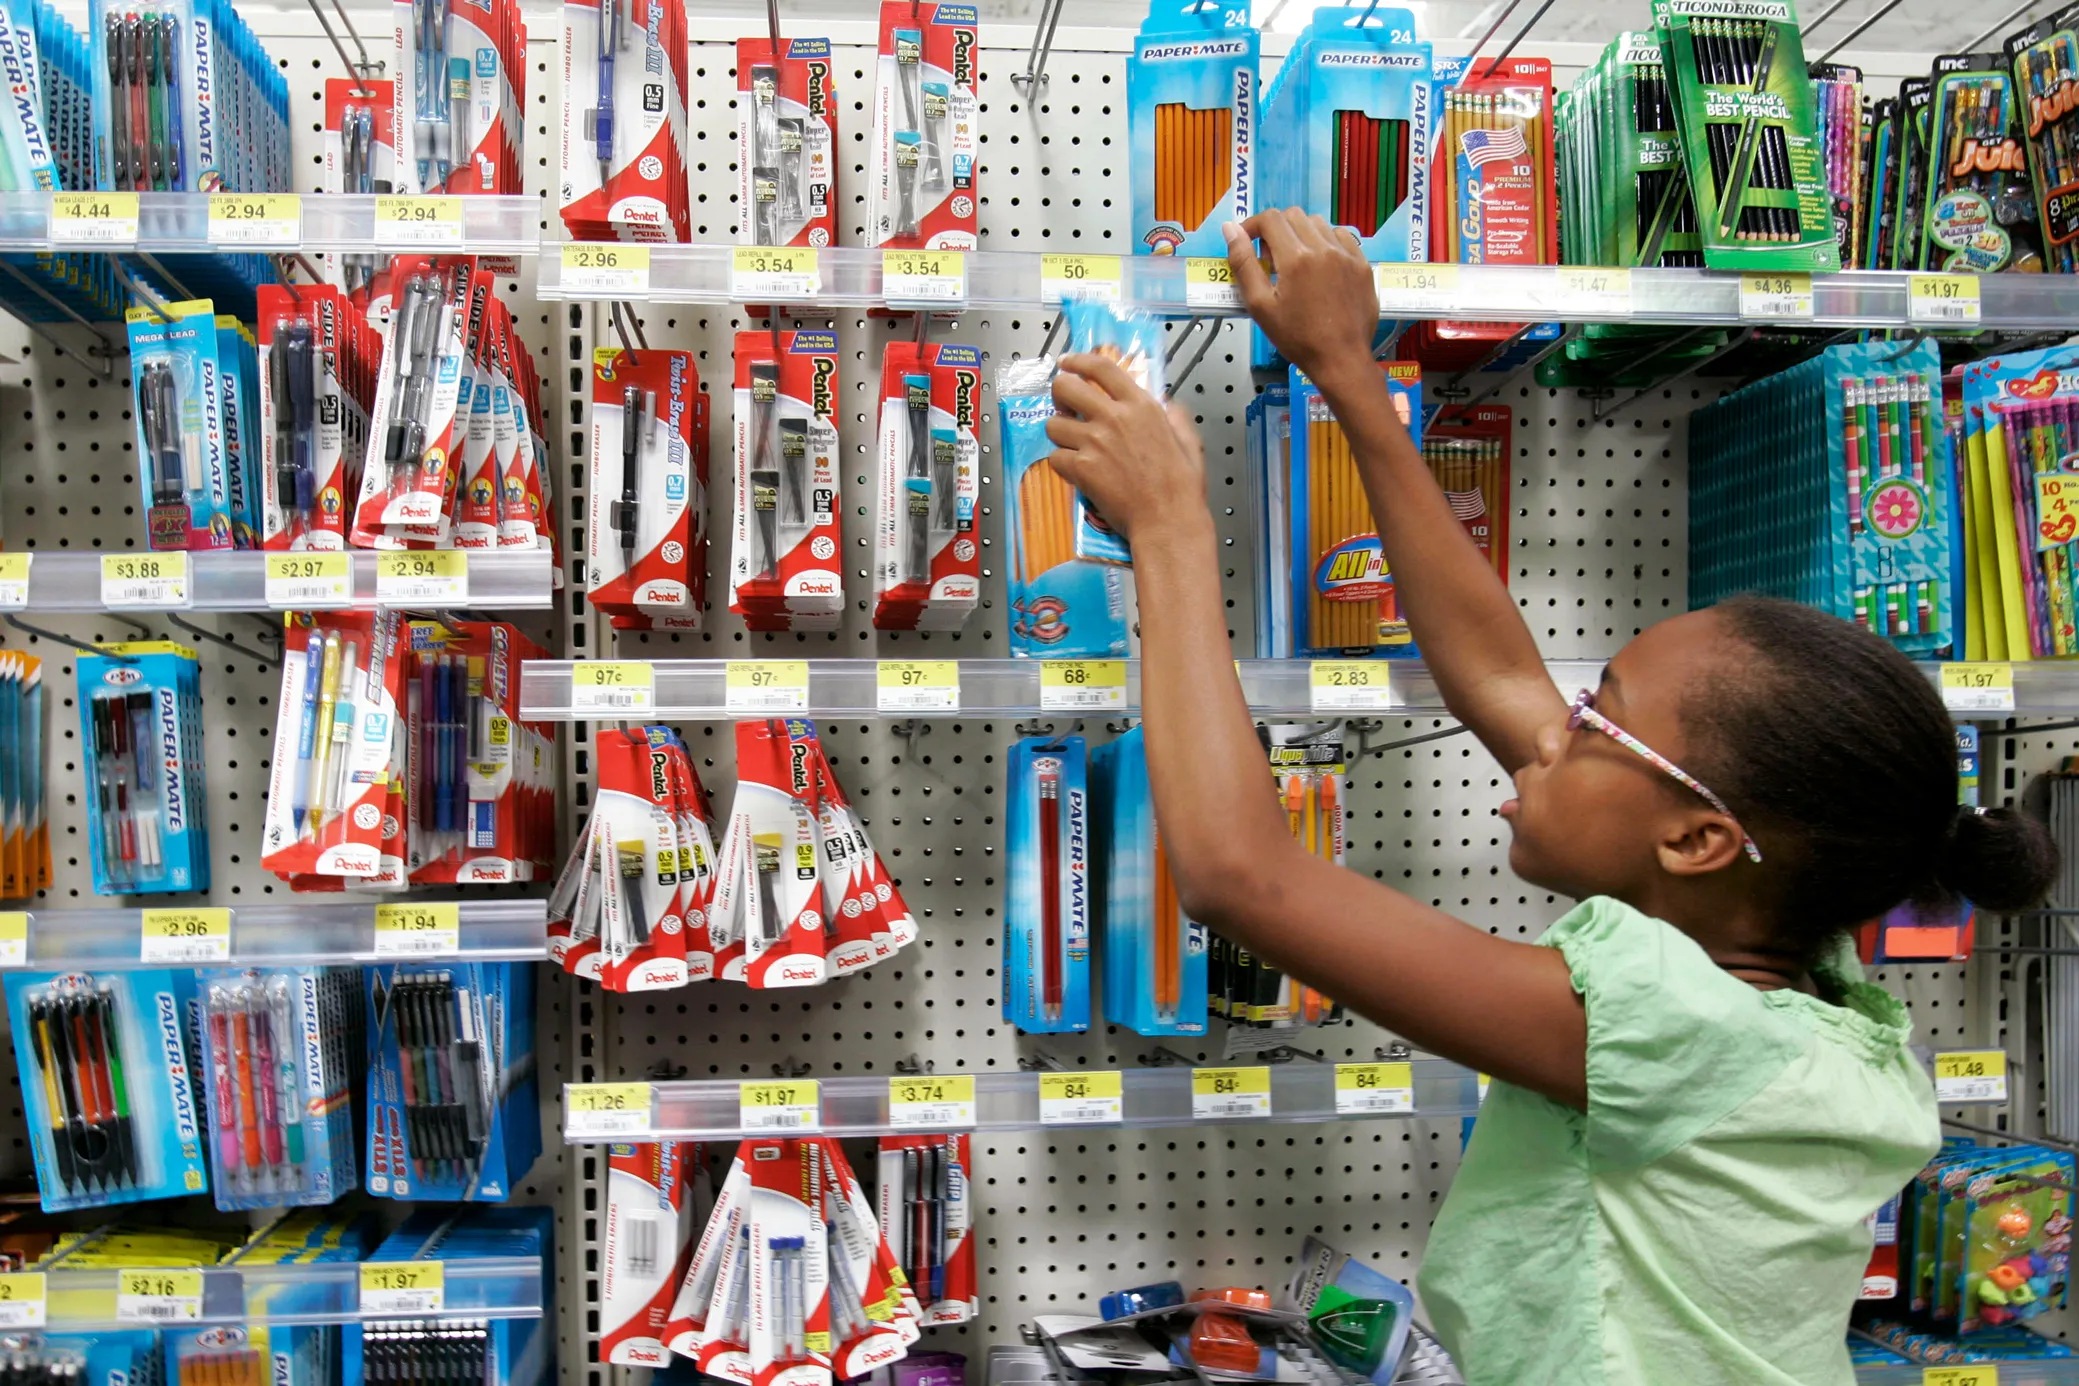 Most parents think school supplies have become too expensive